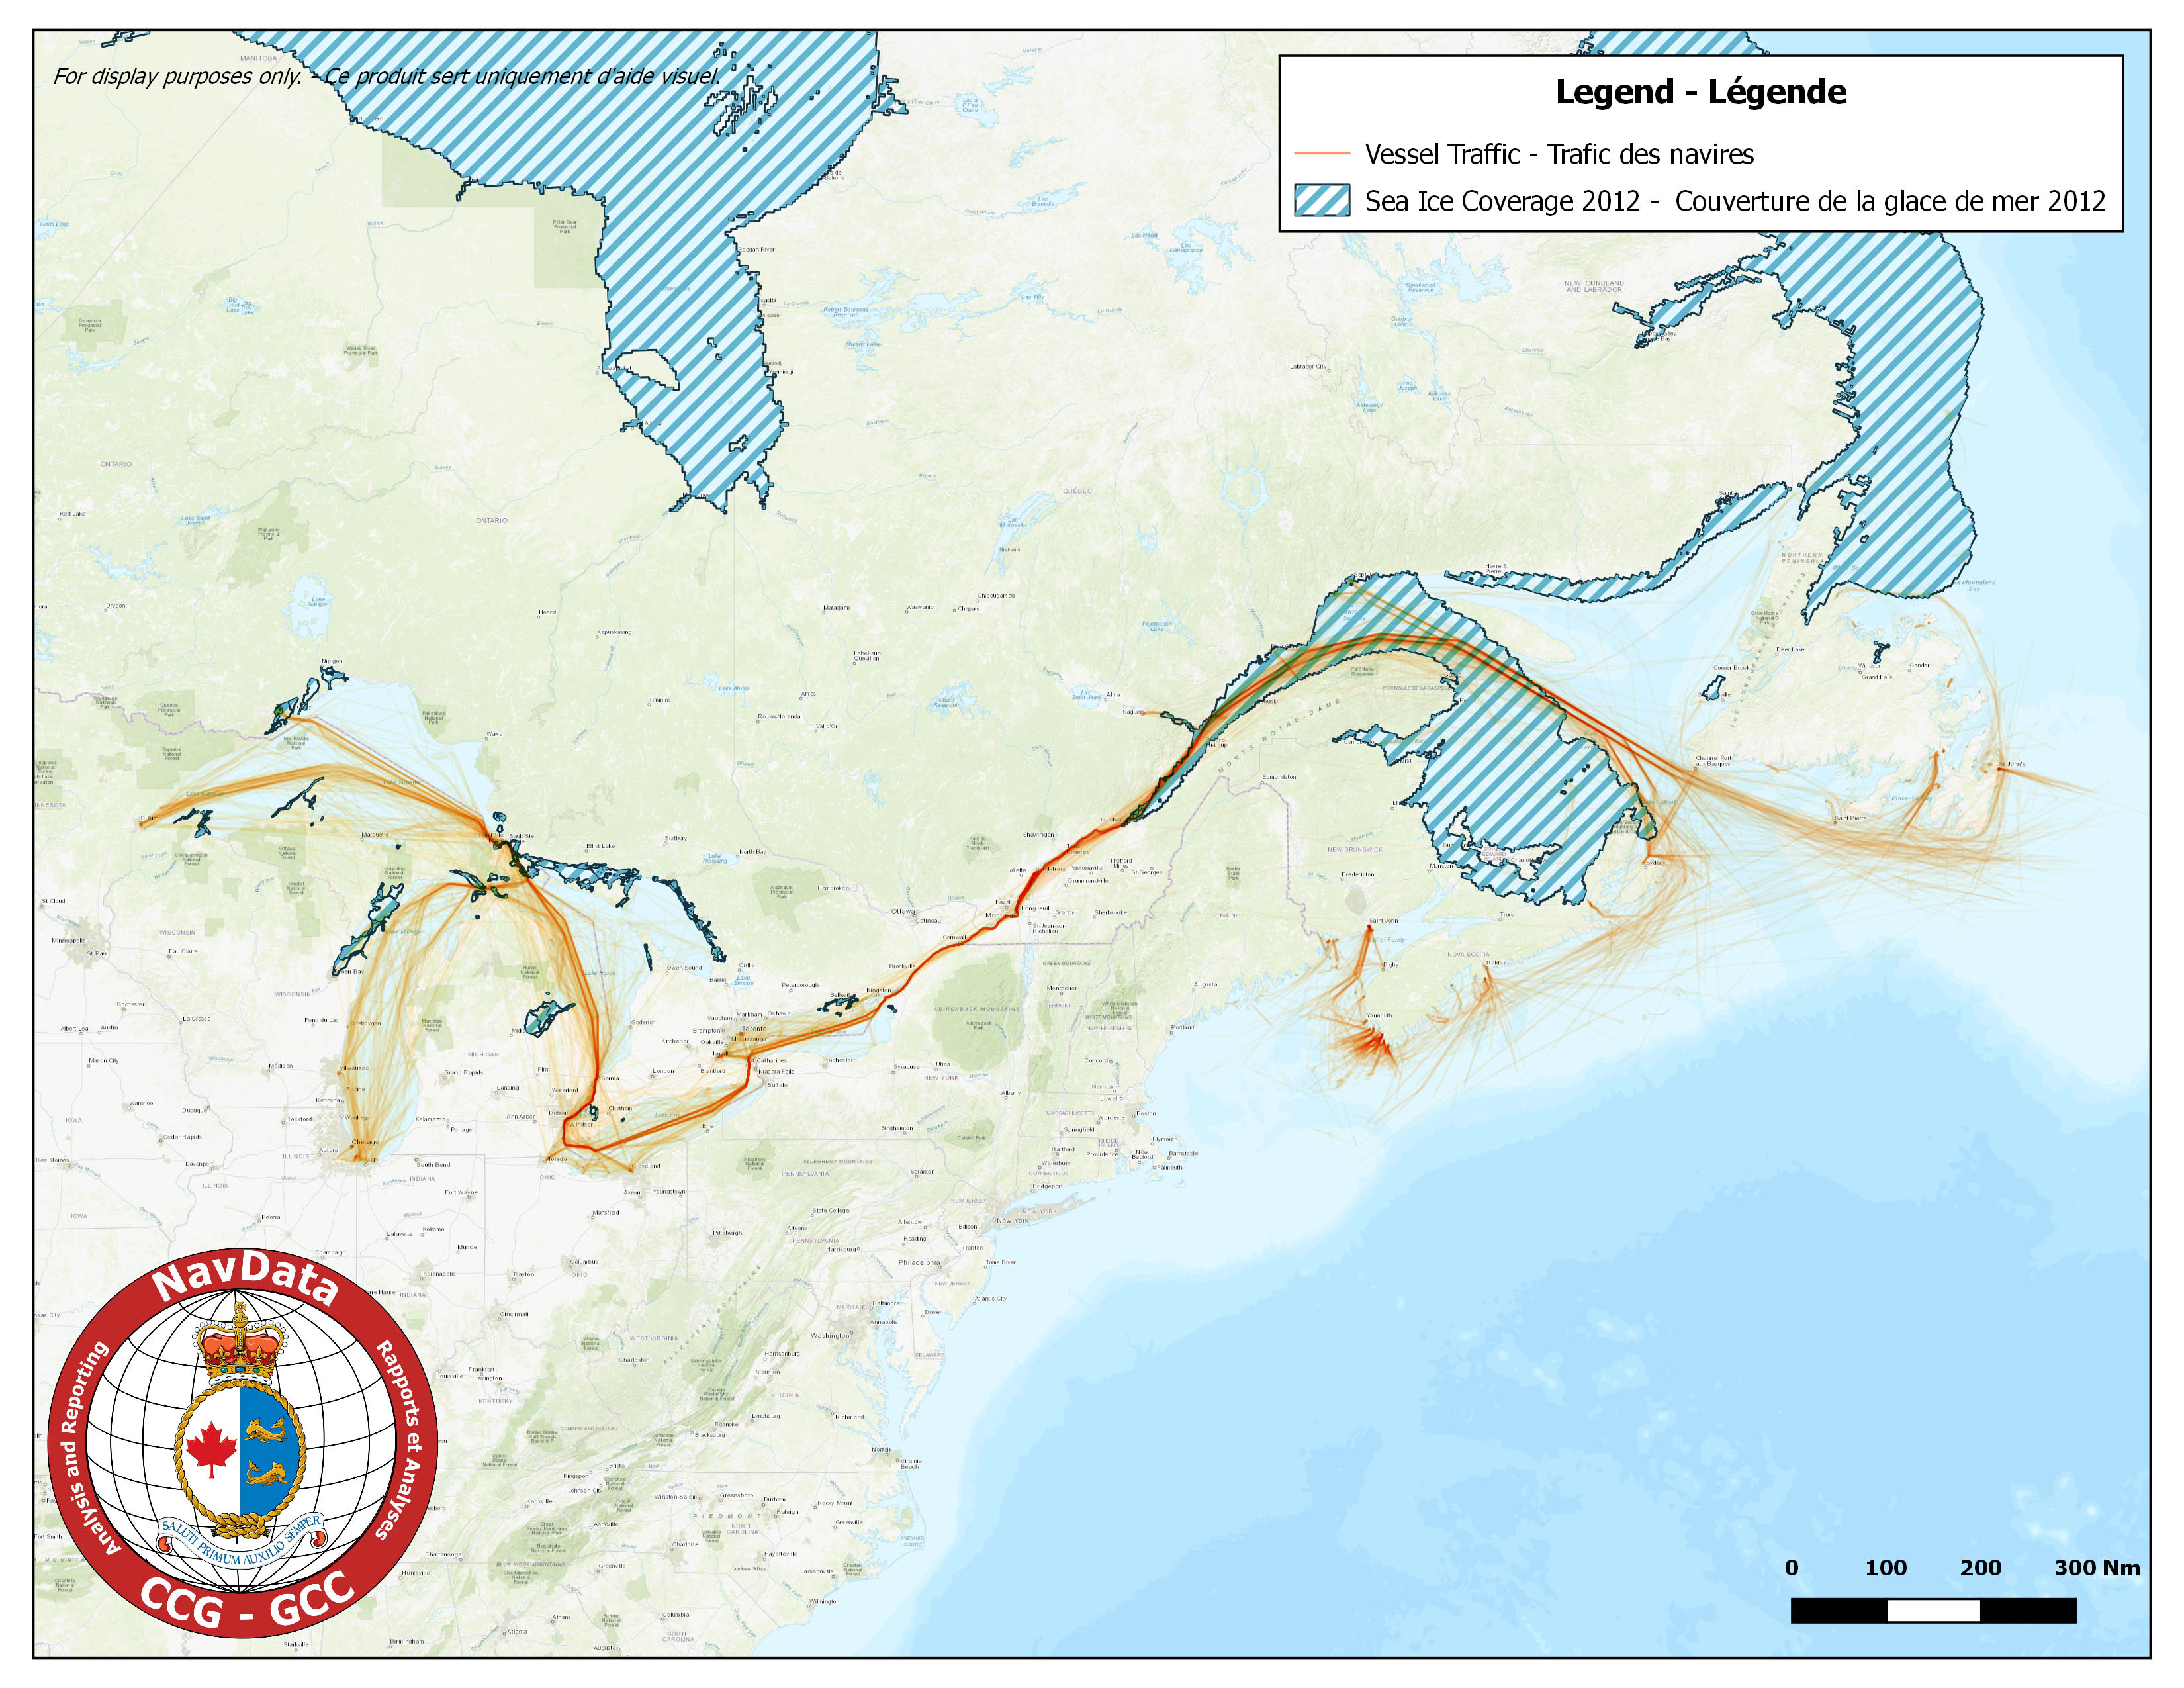 Map showing southern canada traffic density and maximum ice coverage for season of 2012